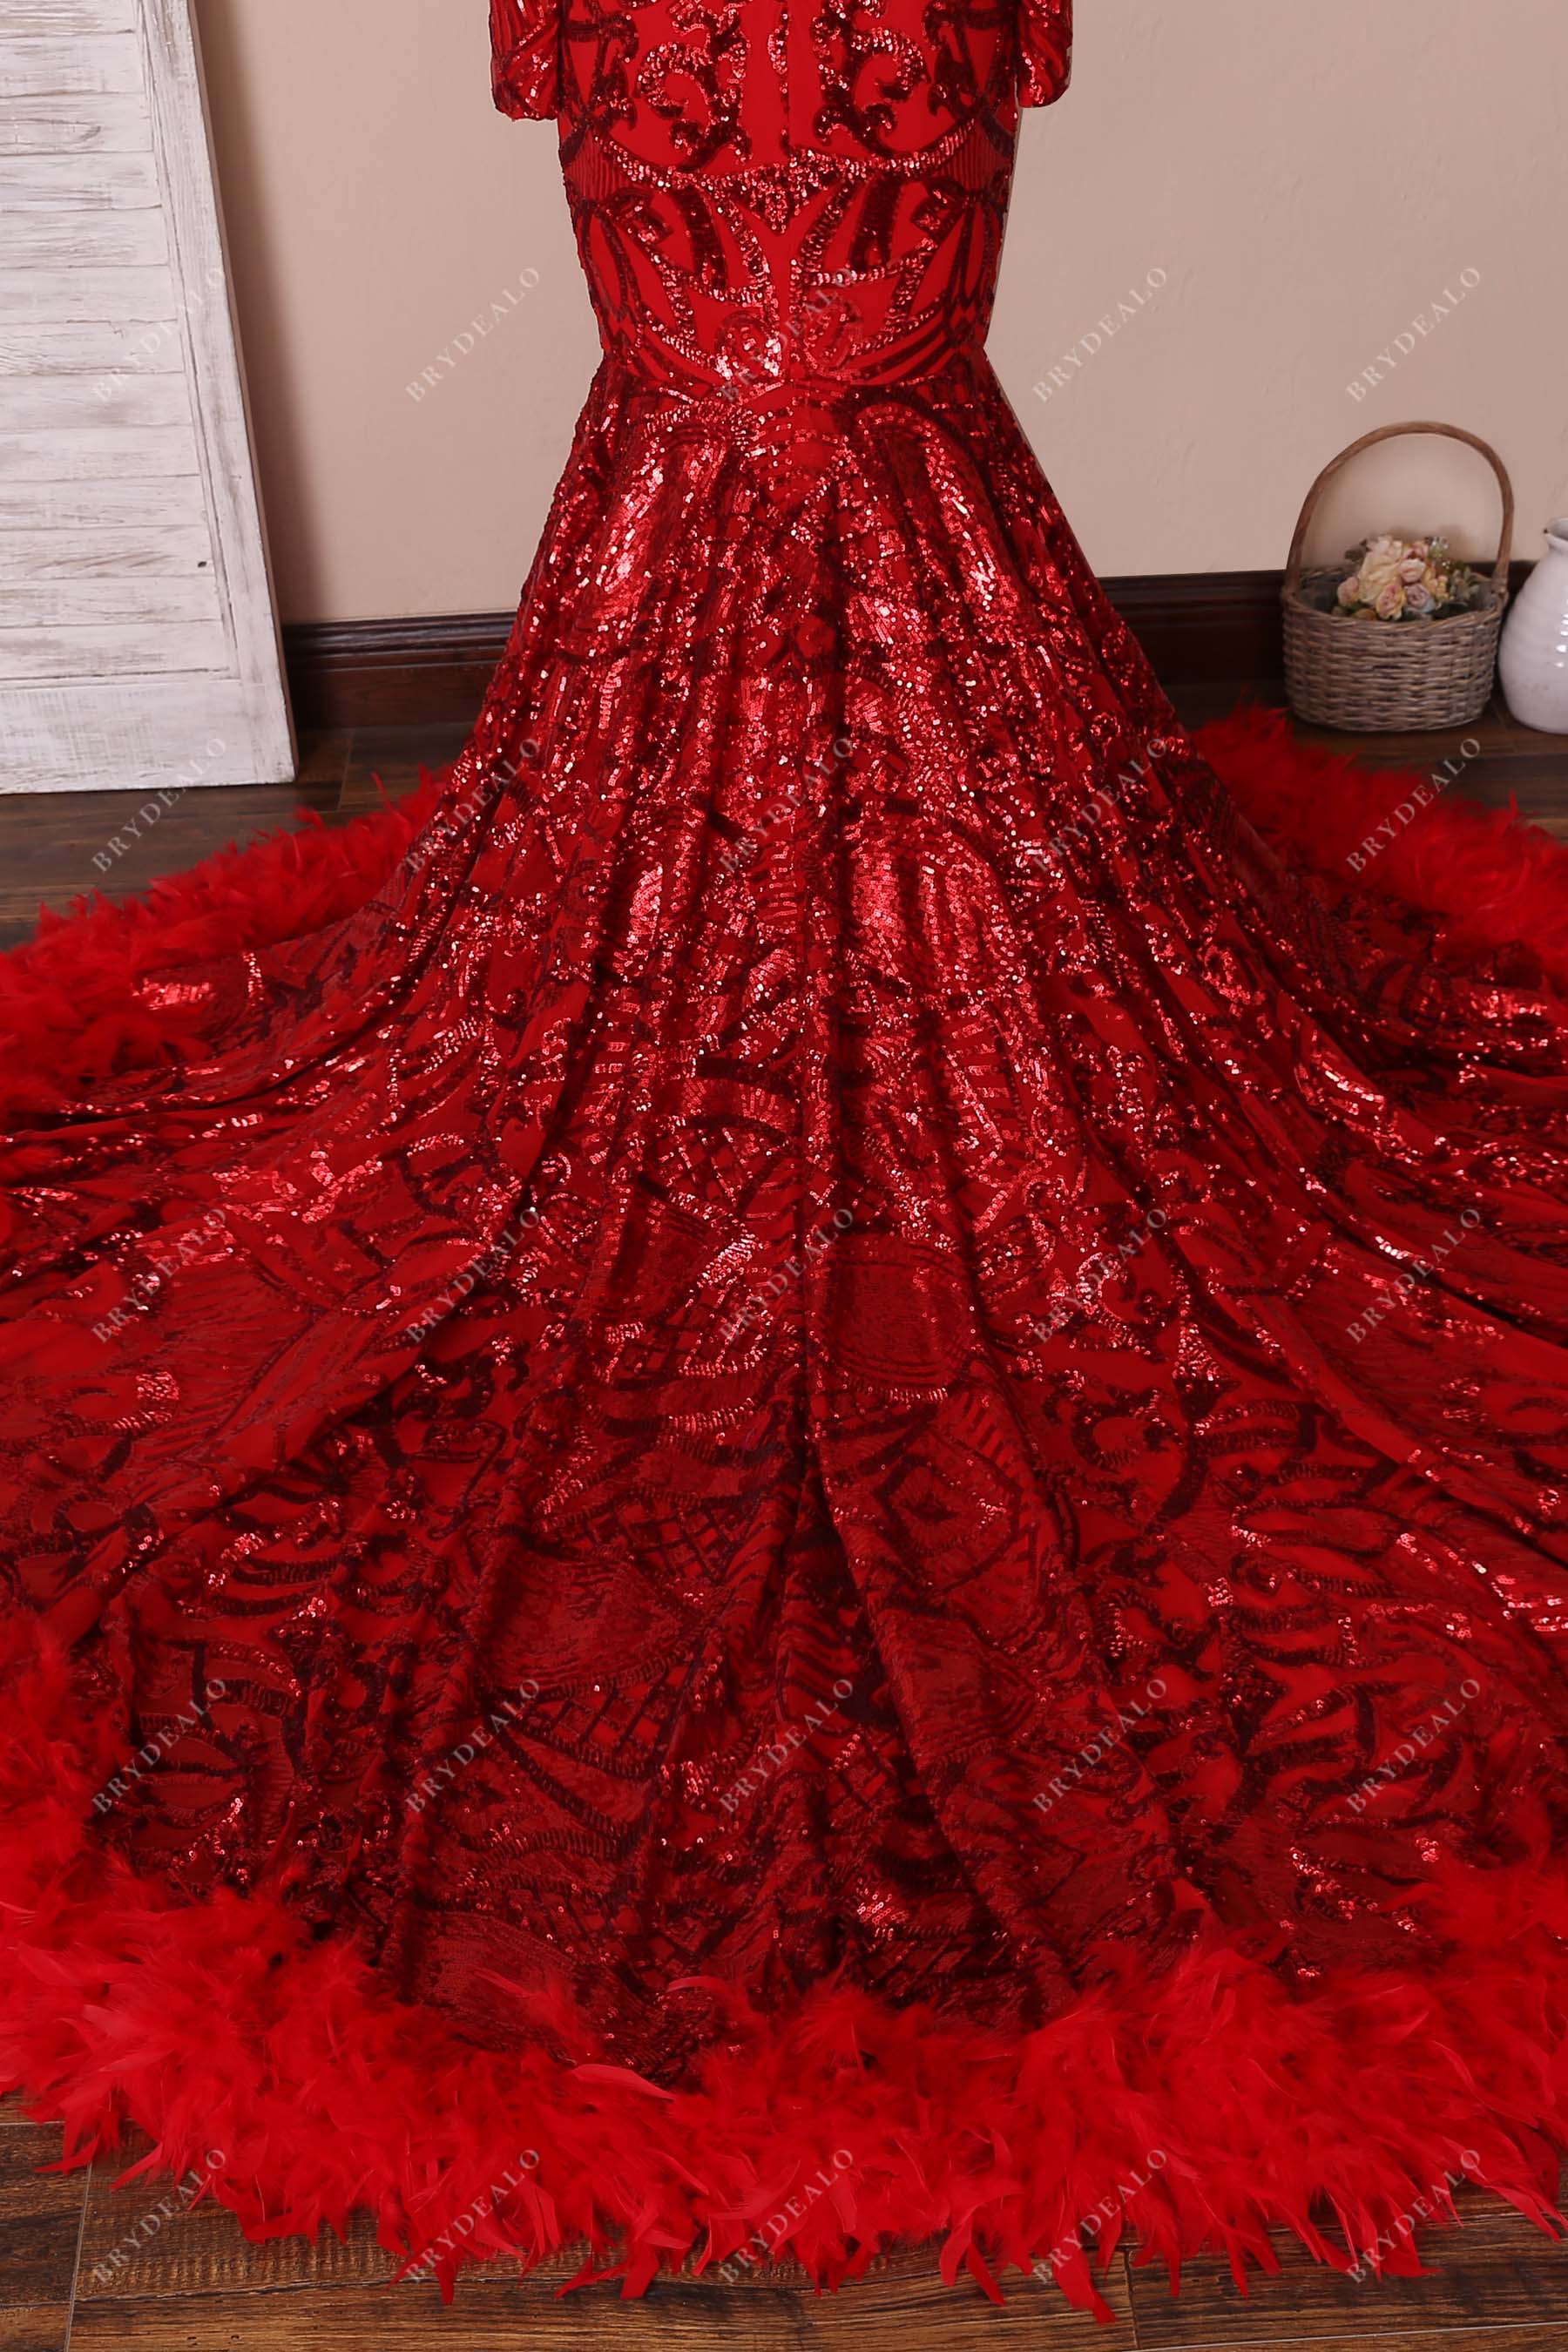 Passion Red Queen Style Sleeves Red Sparkle Ball Gown Wedding Dress With  Beadings, Glitter Tulle & Train Various Styles - Etsy | Gowns, Ball gowns,  Red ball gowns